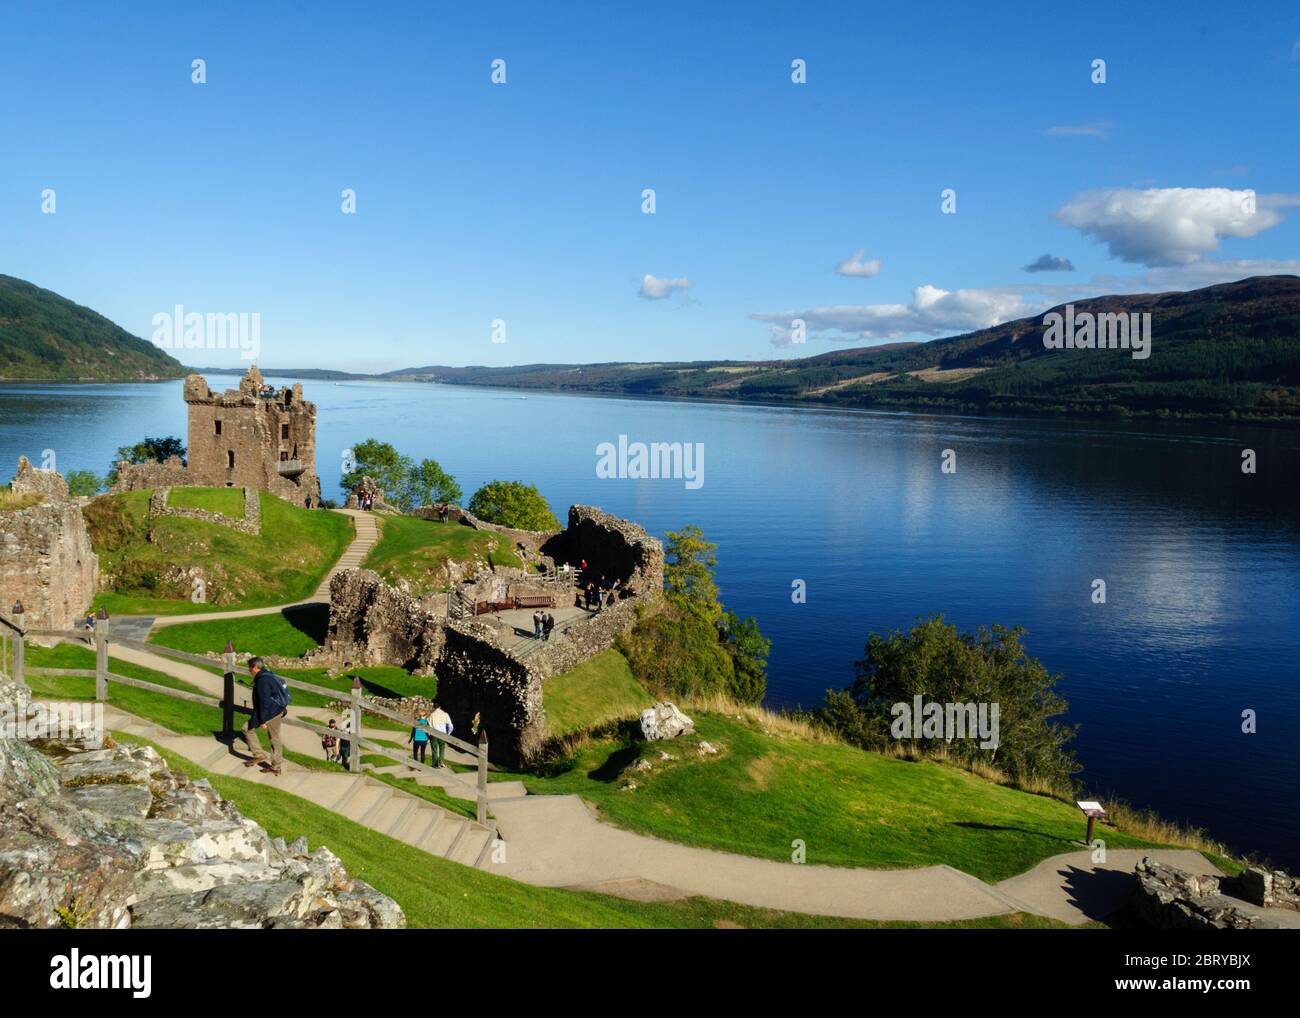 Tourists sightseeing at Urquhart Castle and Loch Ness on a sunny day Stock Photo